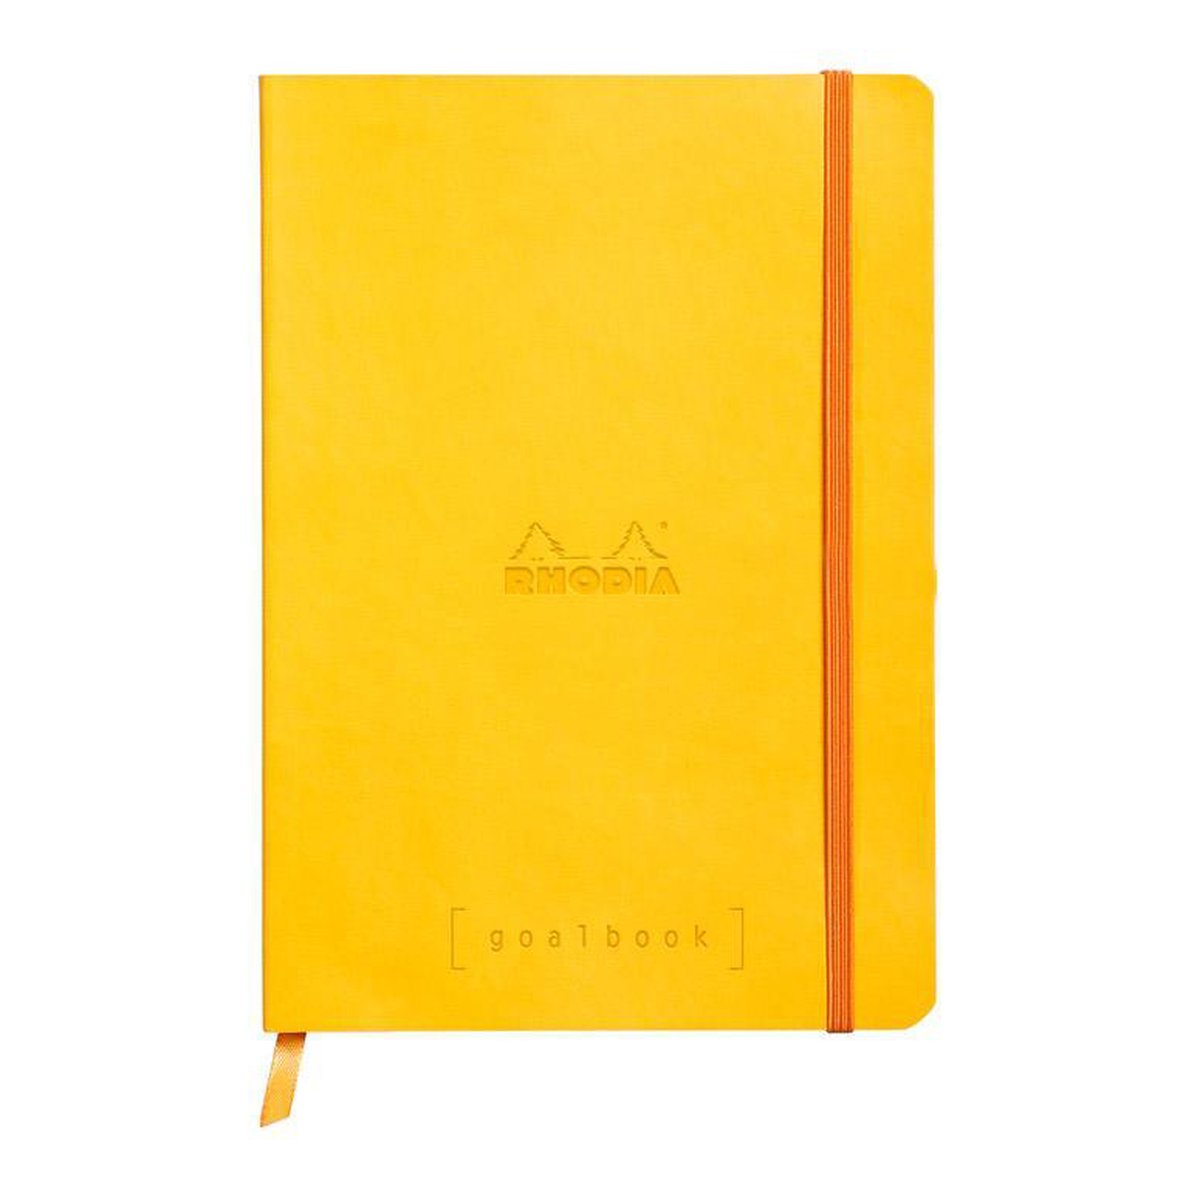 Rhodia Goalbook Dotted A5 Softcover - Daffodil [Wit Papier]